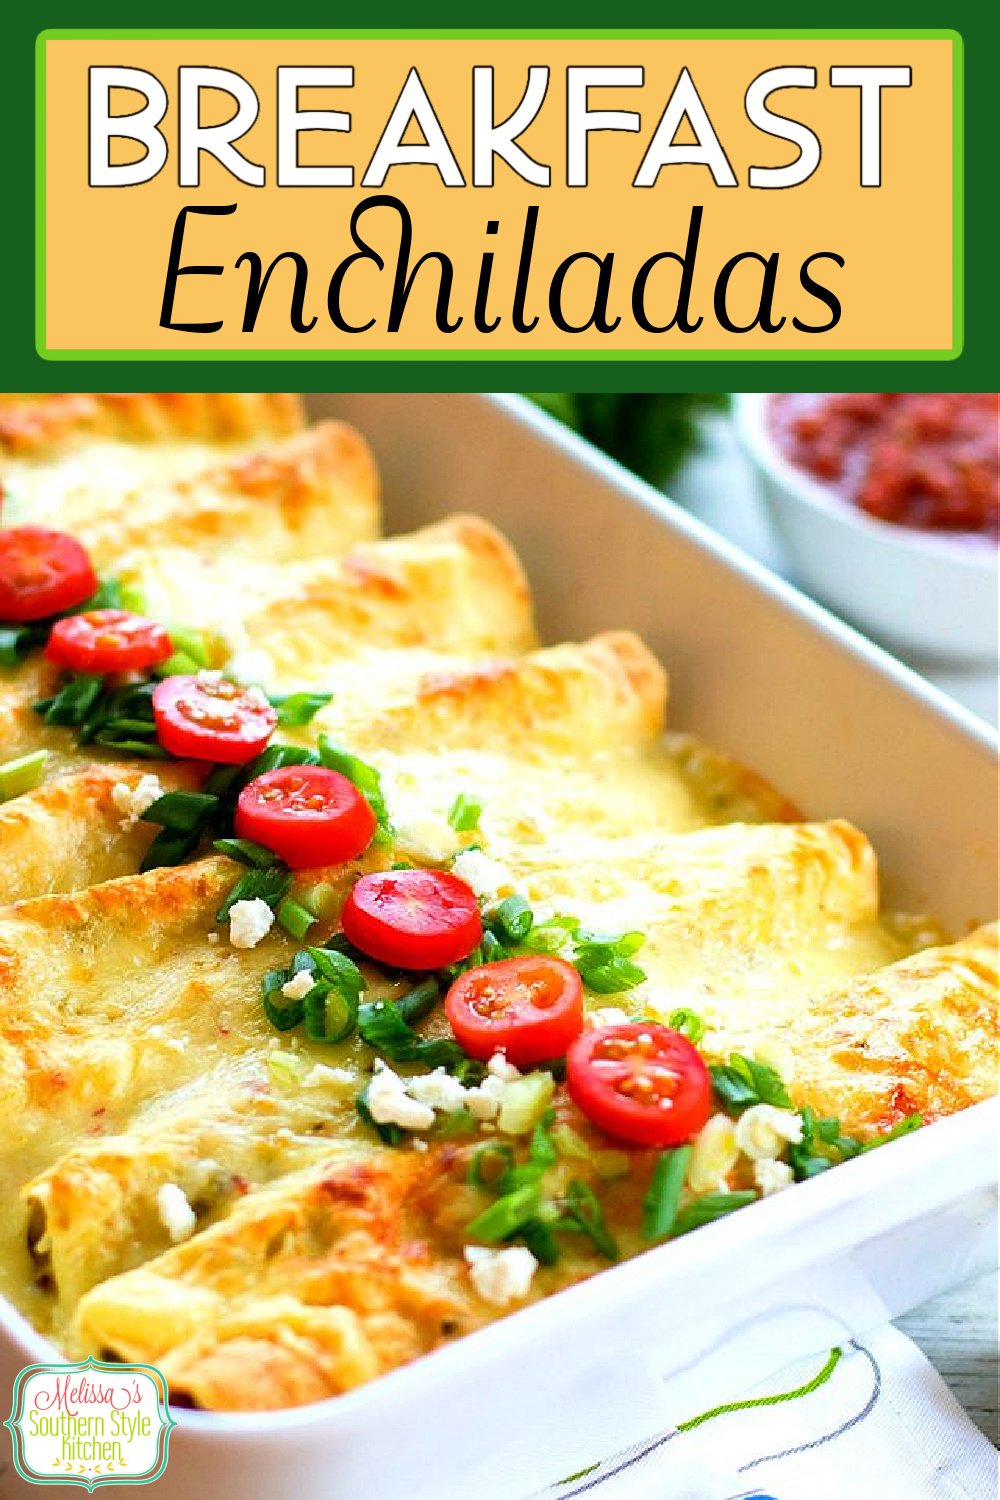 Breakfast Enchiladas wrap-up everything you love about breakfast in tortillas smothered with a creamy salsa verde sauce #breakfastenchiladas #breakfast #enchiladas #eggs #sausage #casseroles #brunch #mexicanfood #salsaverde #salsa #southernfood #southernrecipes via @melissasssk